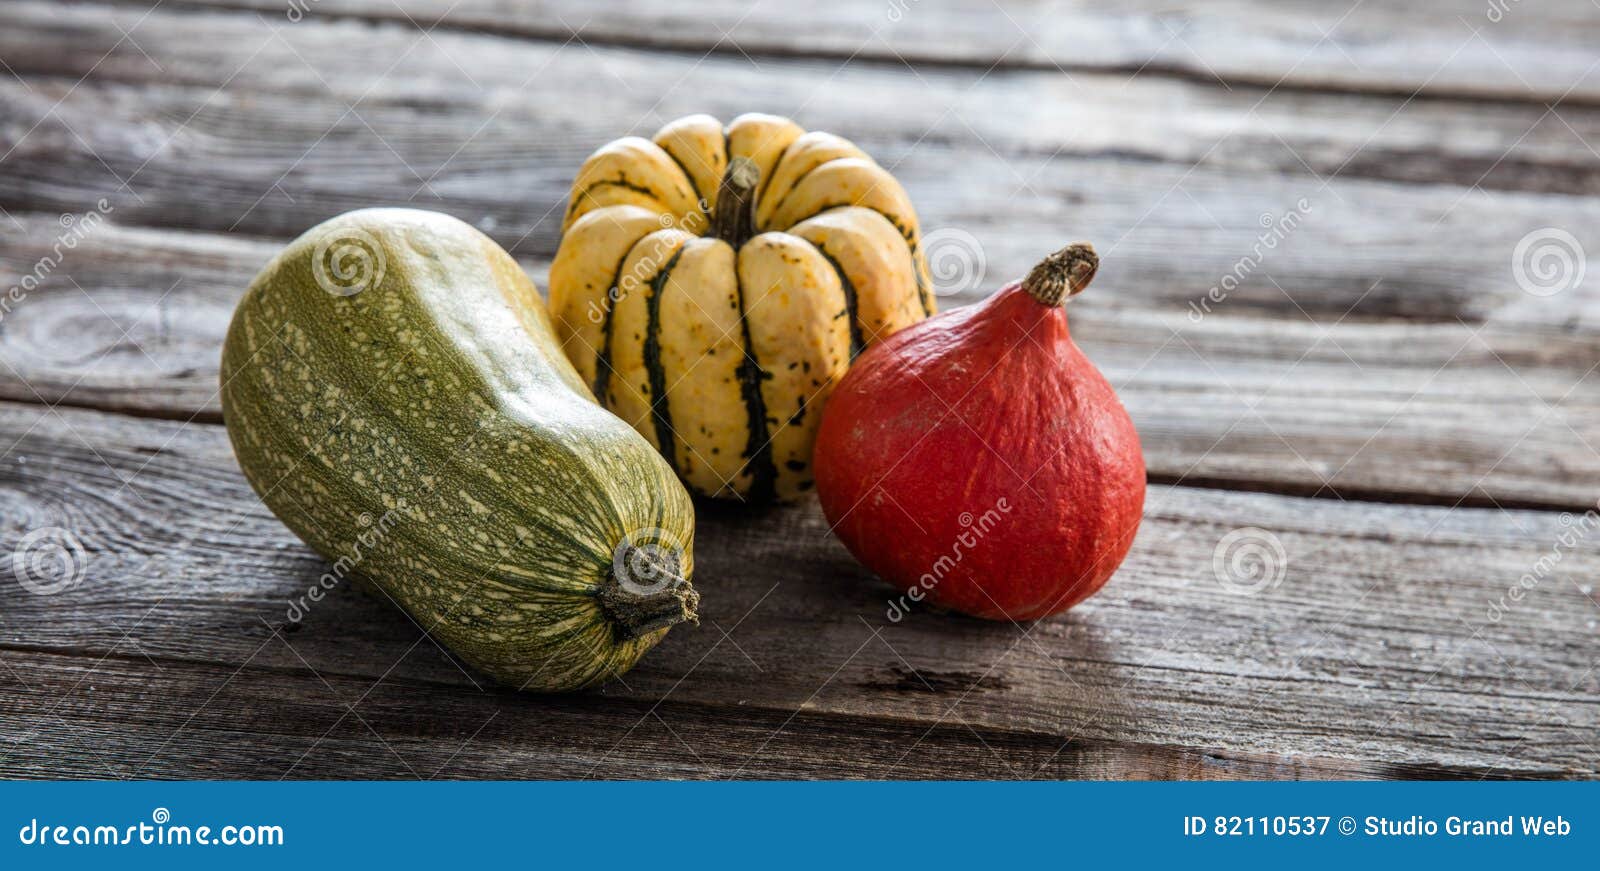 still life of kuri squash and green gourd over wood